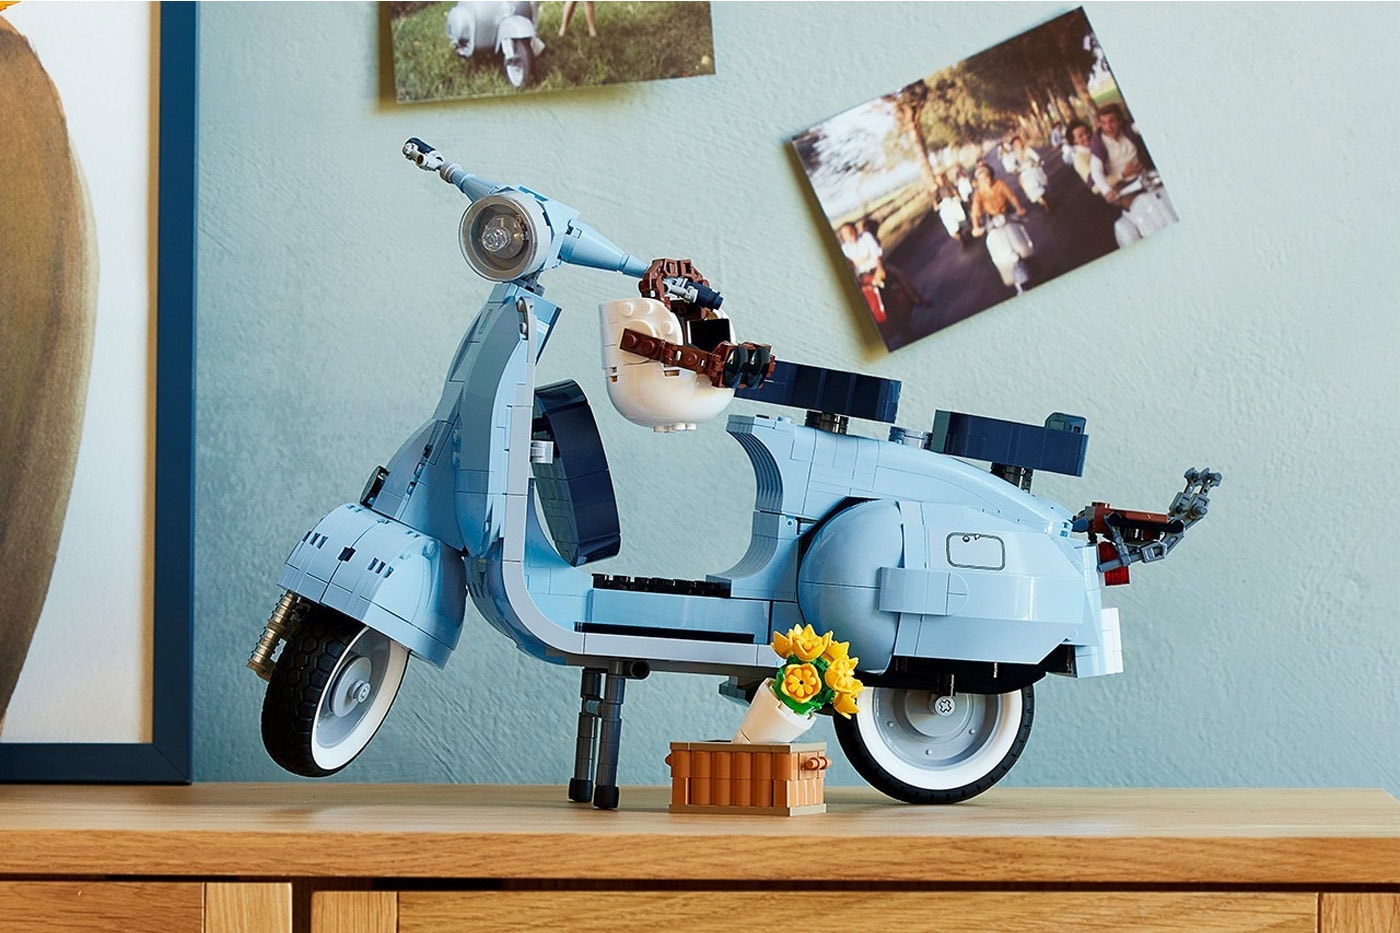 Lego Vespa Scooter Is '60s Italy in Miniature